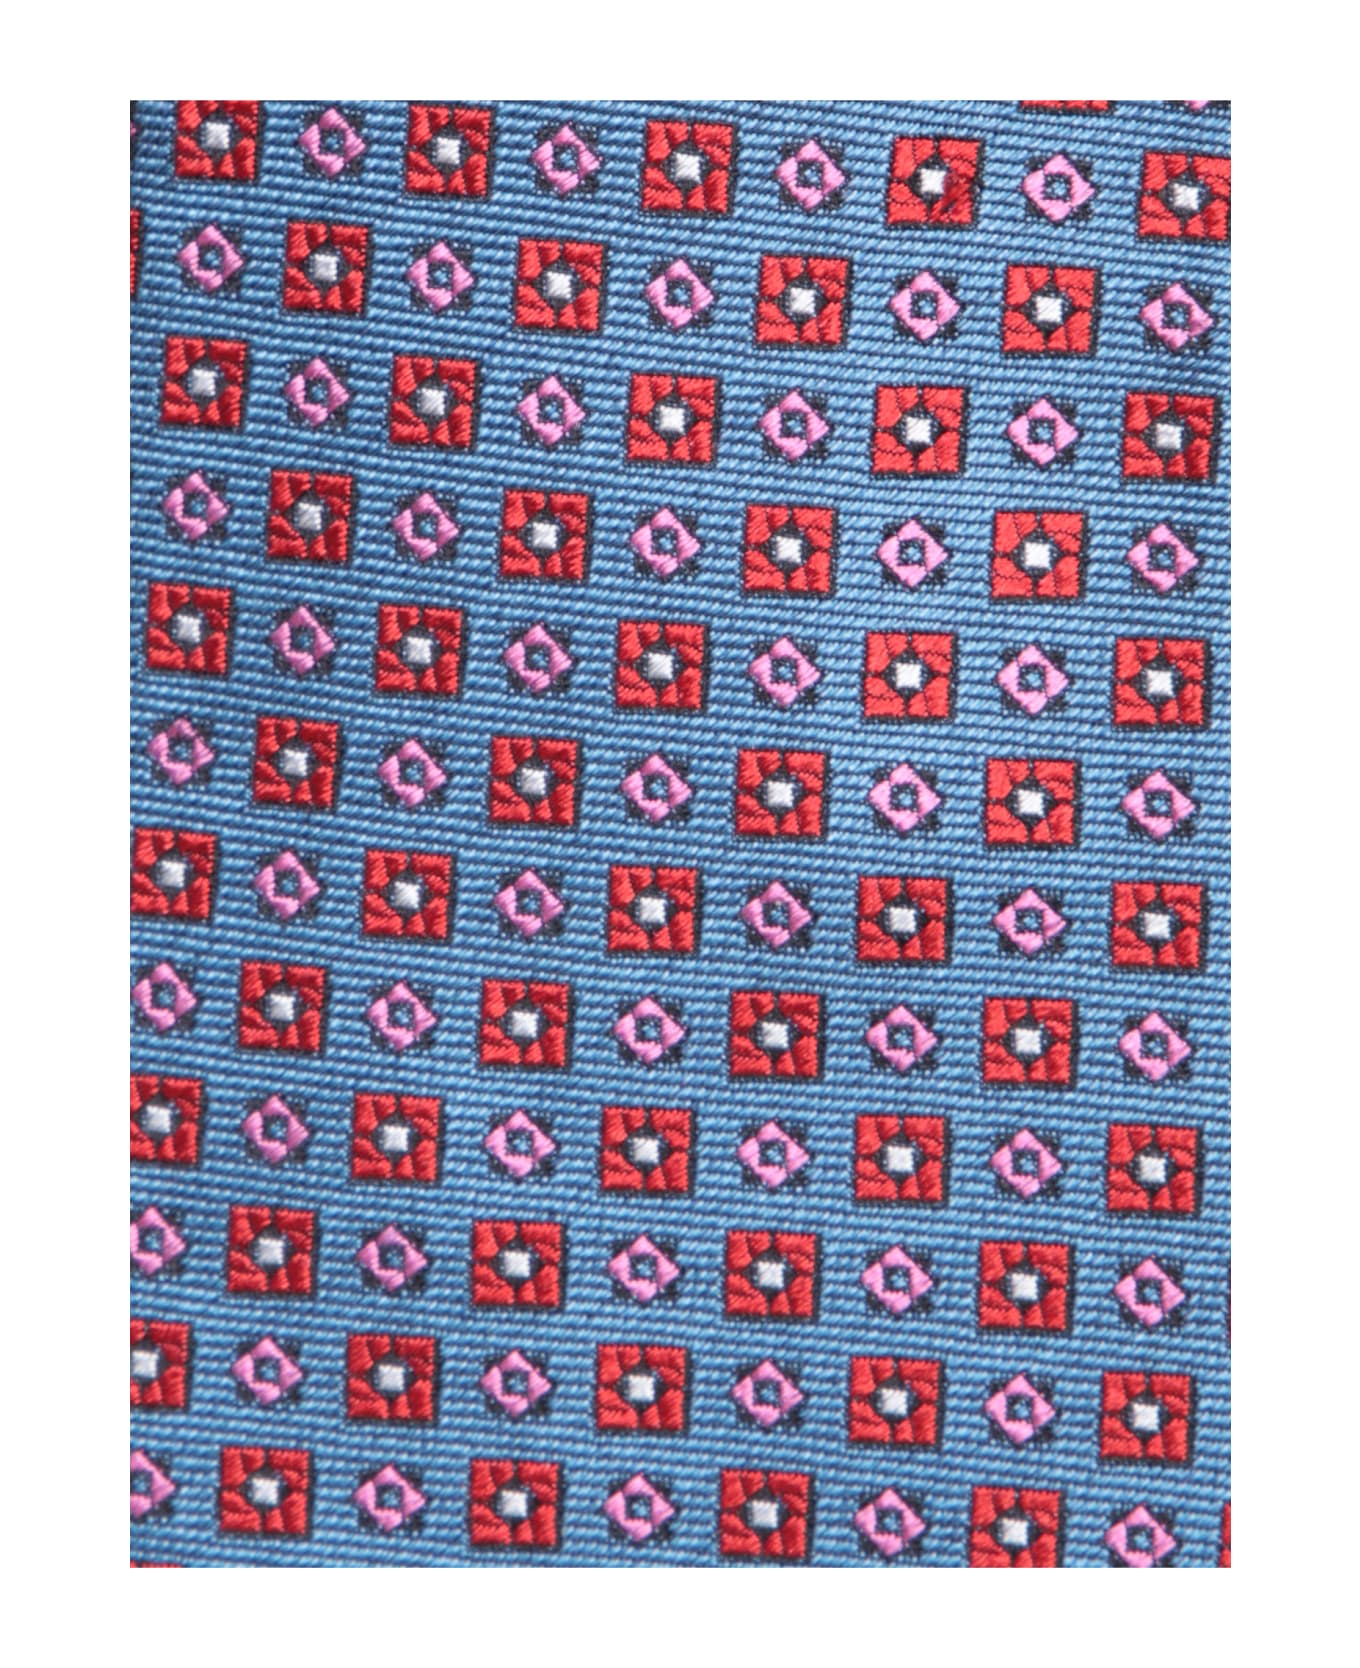 Kiton Blue/red/fuchsia Patterned Tie - Pink